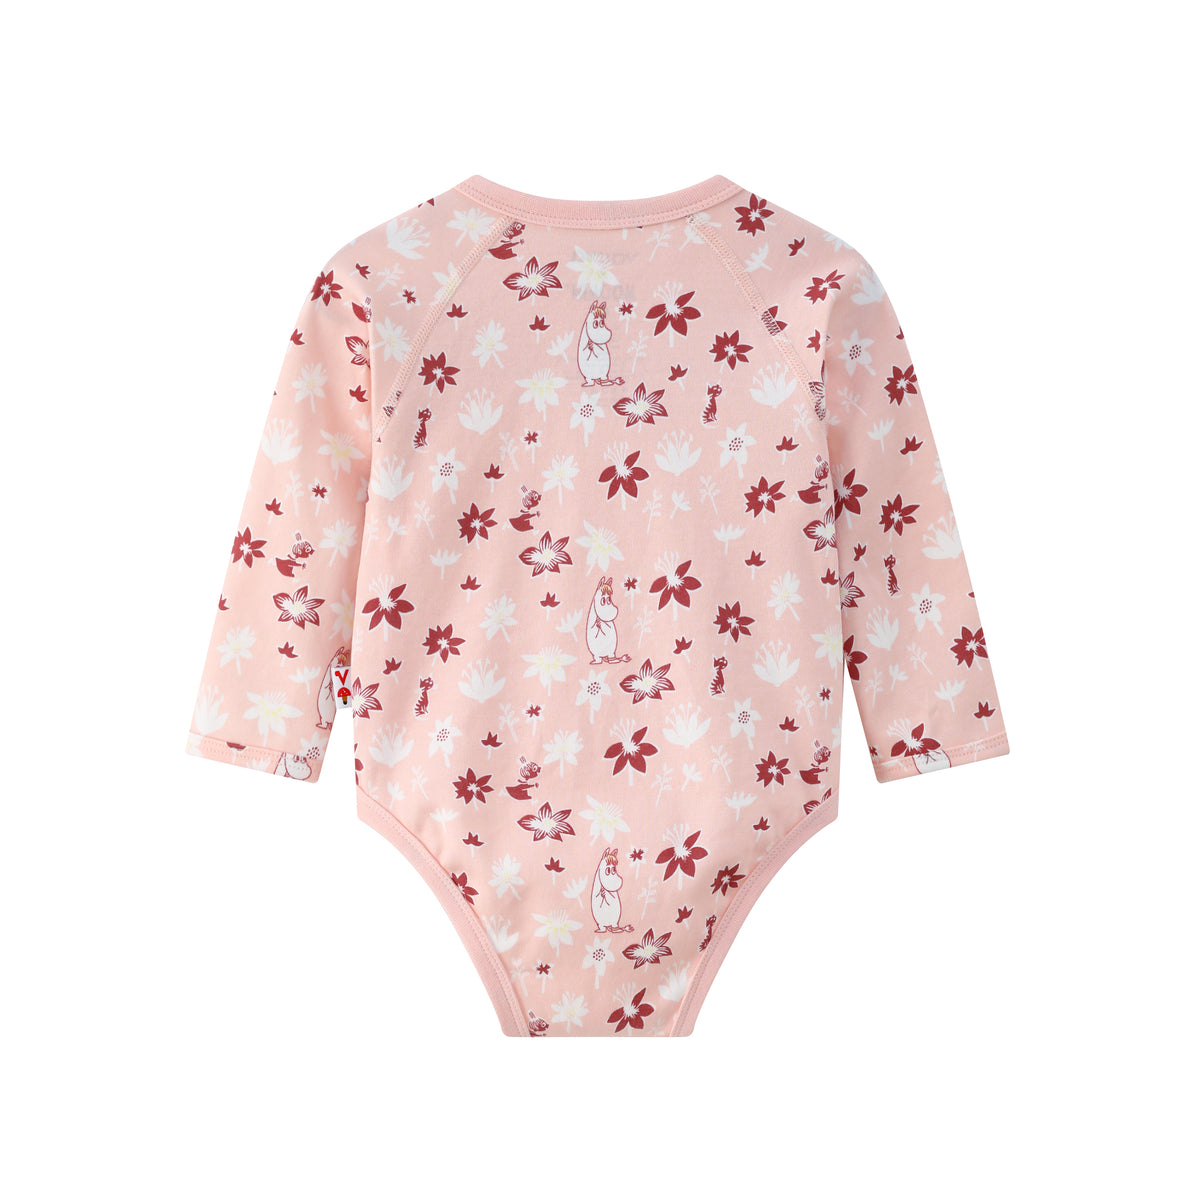 Vauva x Moomin FW23 - Baby Girls Moomin All Over Print Cotton Long Sleeve Bodysuit (Pink) product image back